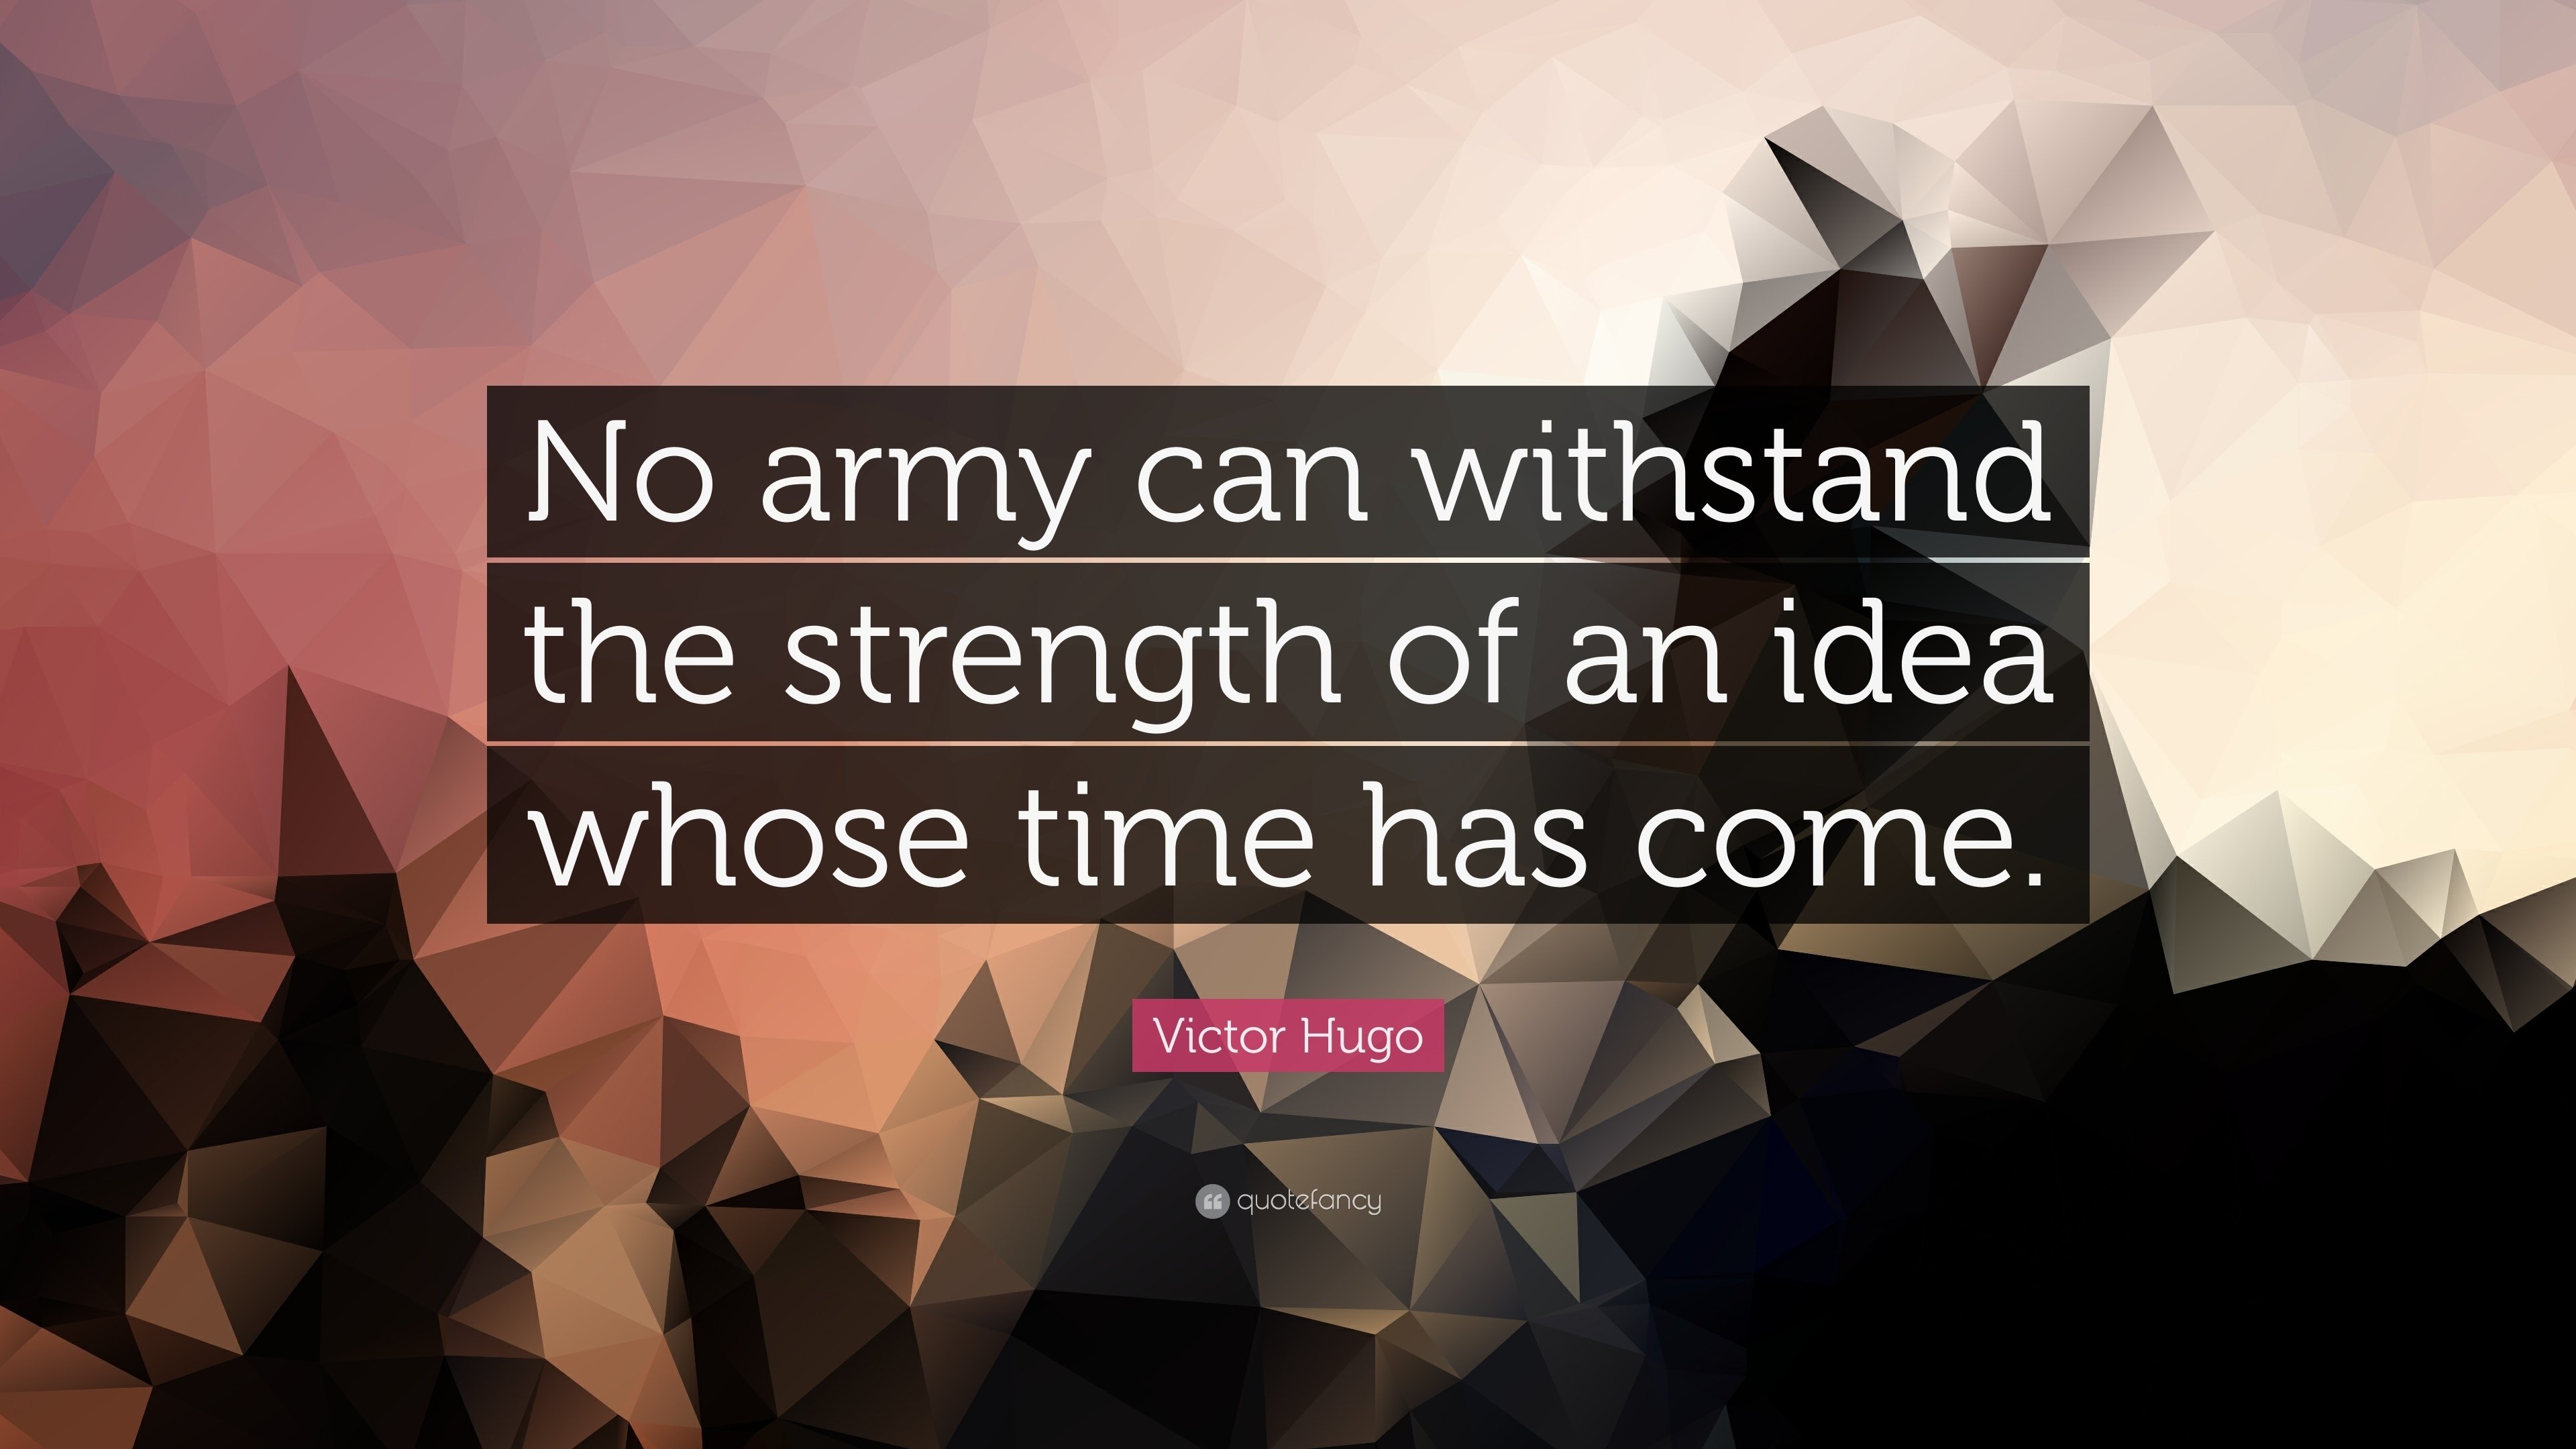 10 Wonderful An Idea Whose Time Has Come victor hugo quote no army can withstand the strength of an idea 5 2022